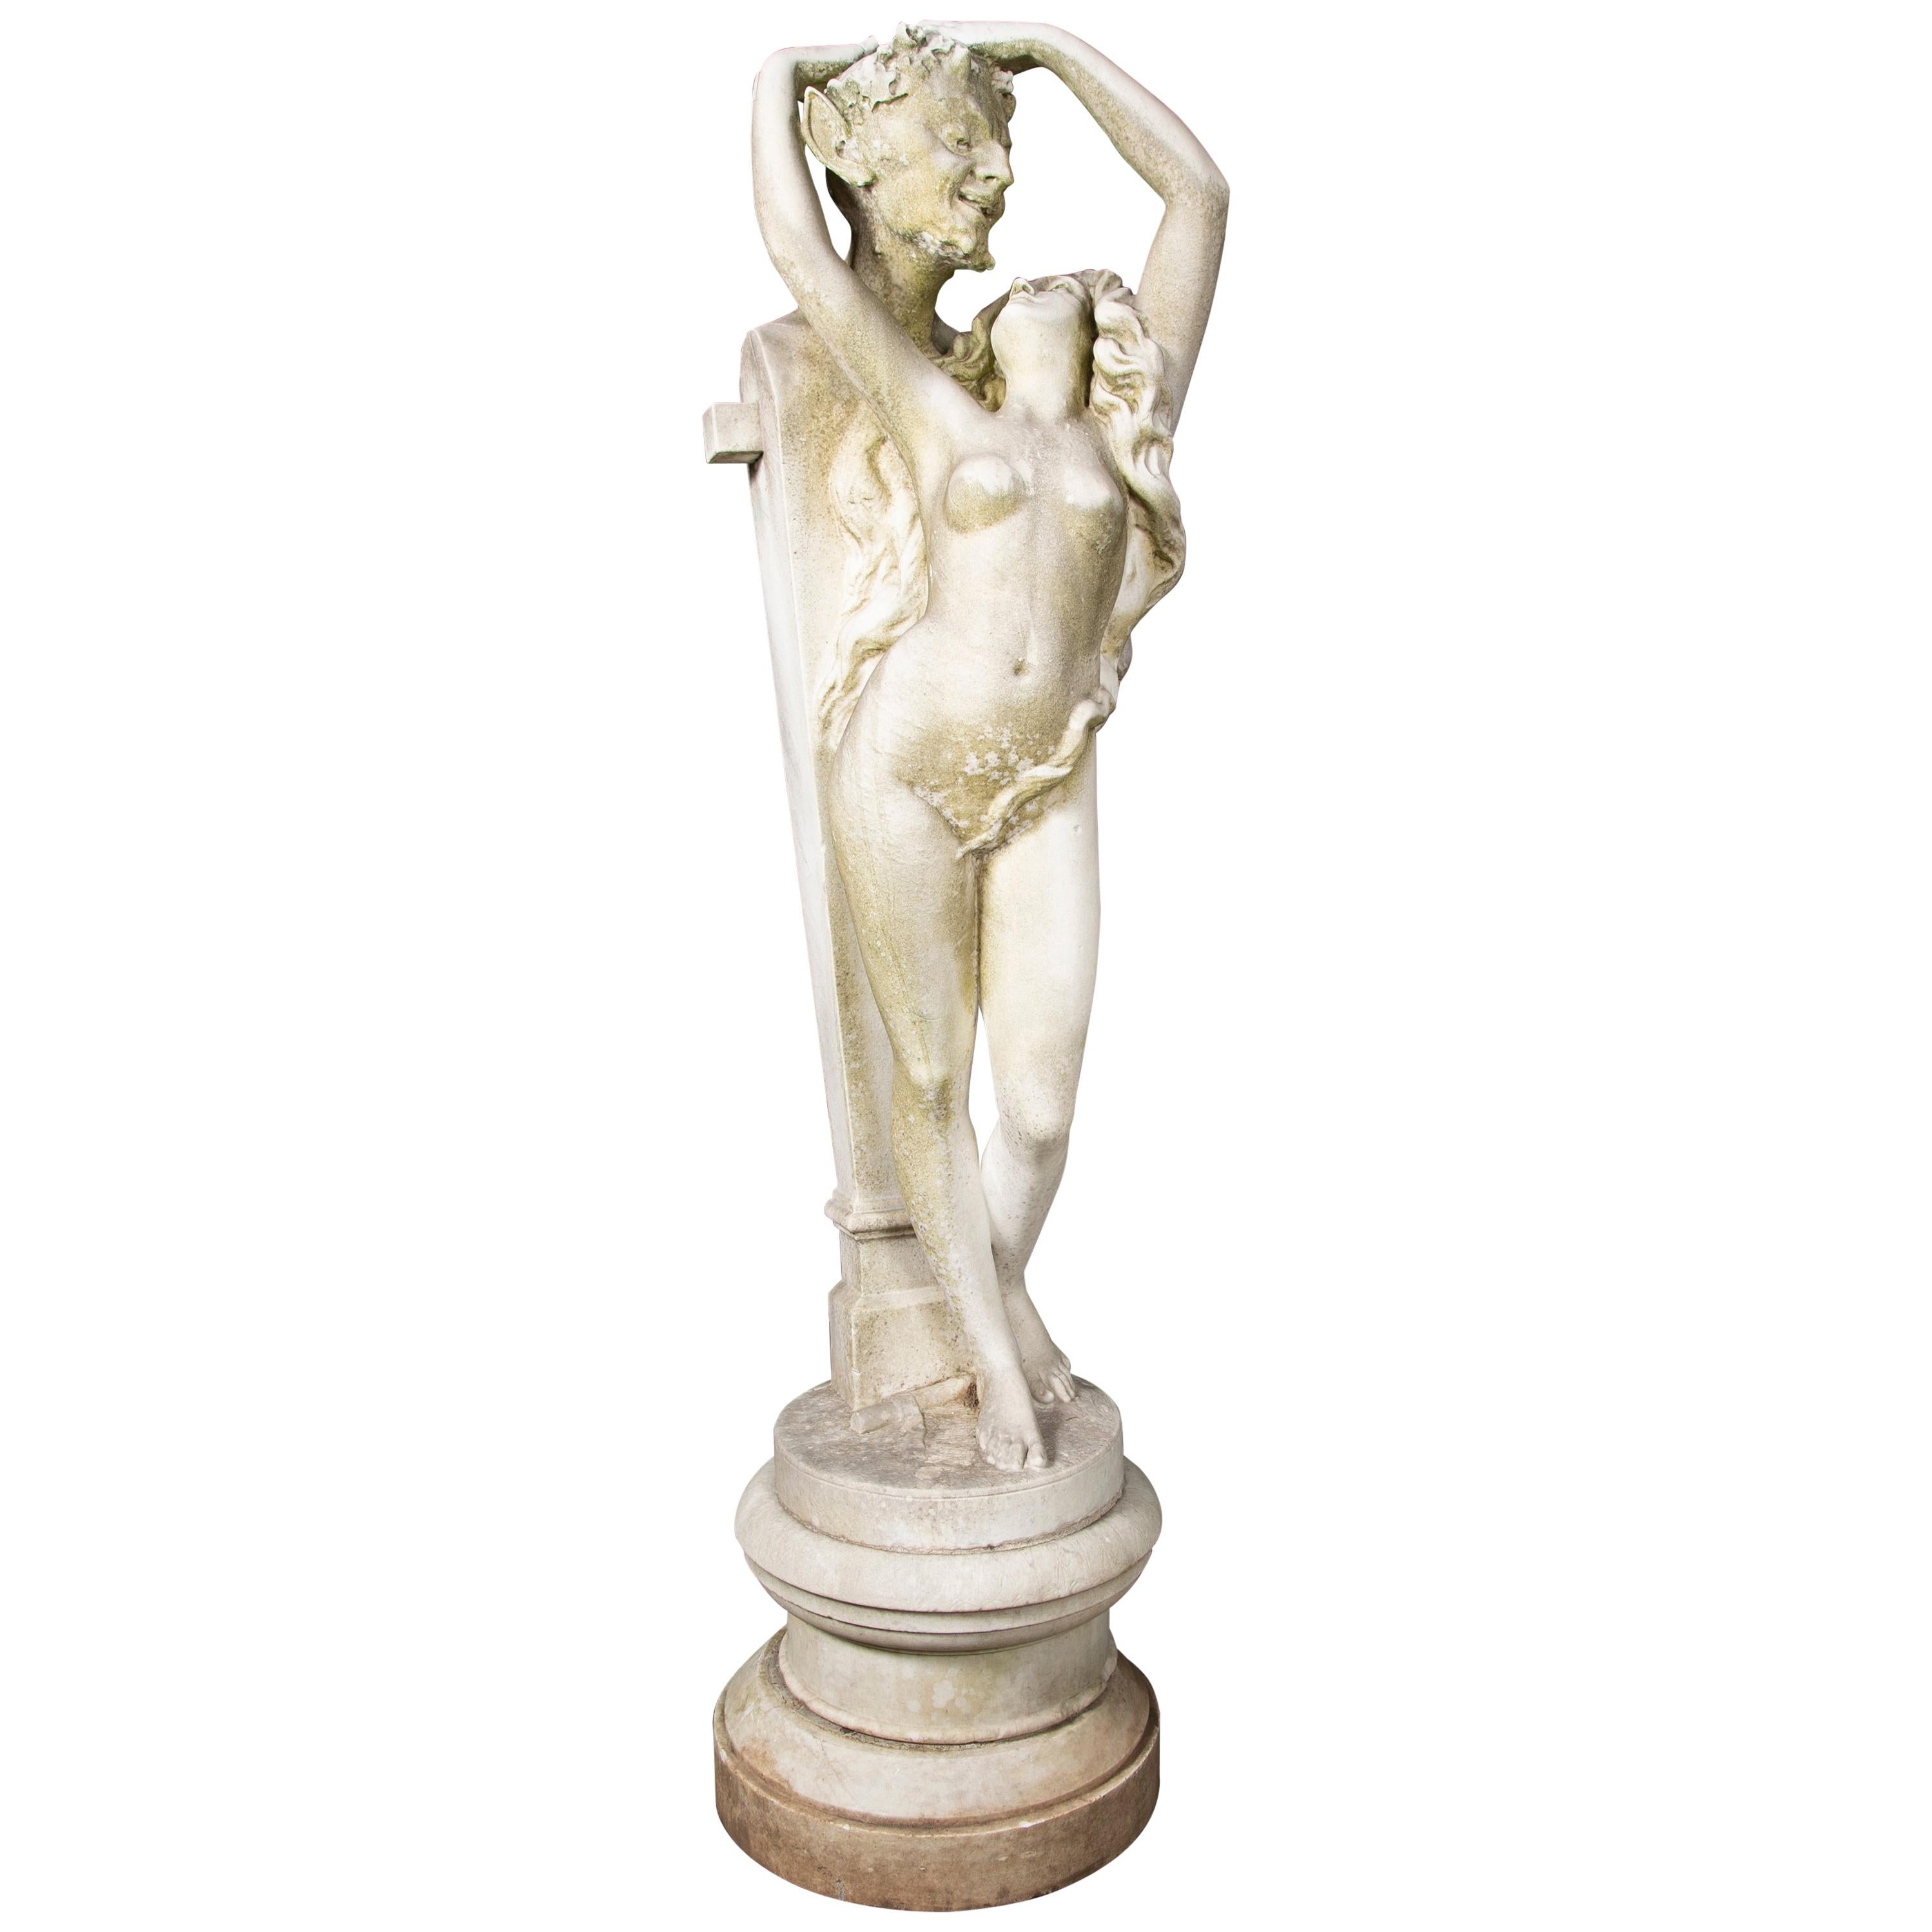 Carved Carrara Marble Statue of a Satyr & Maiden